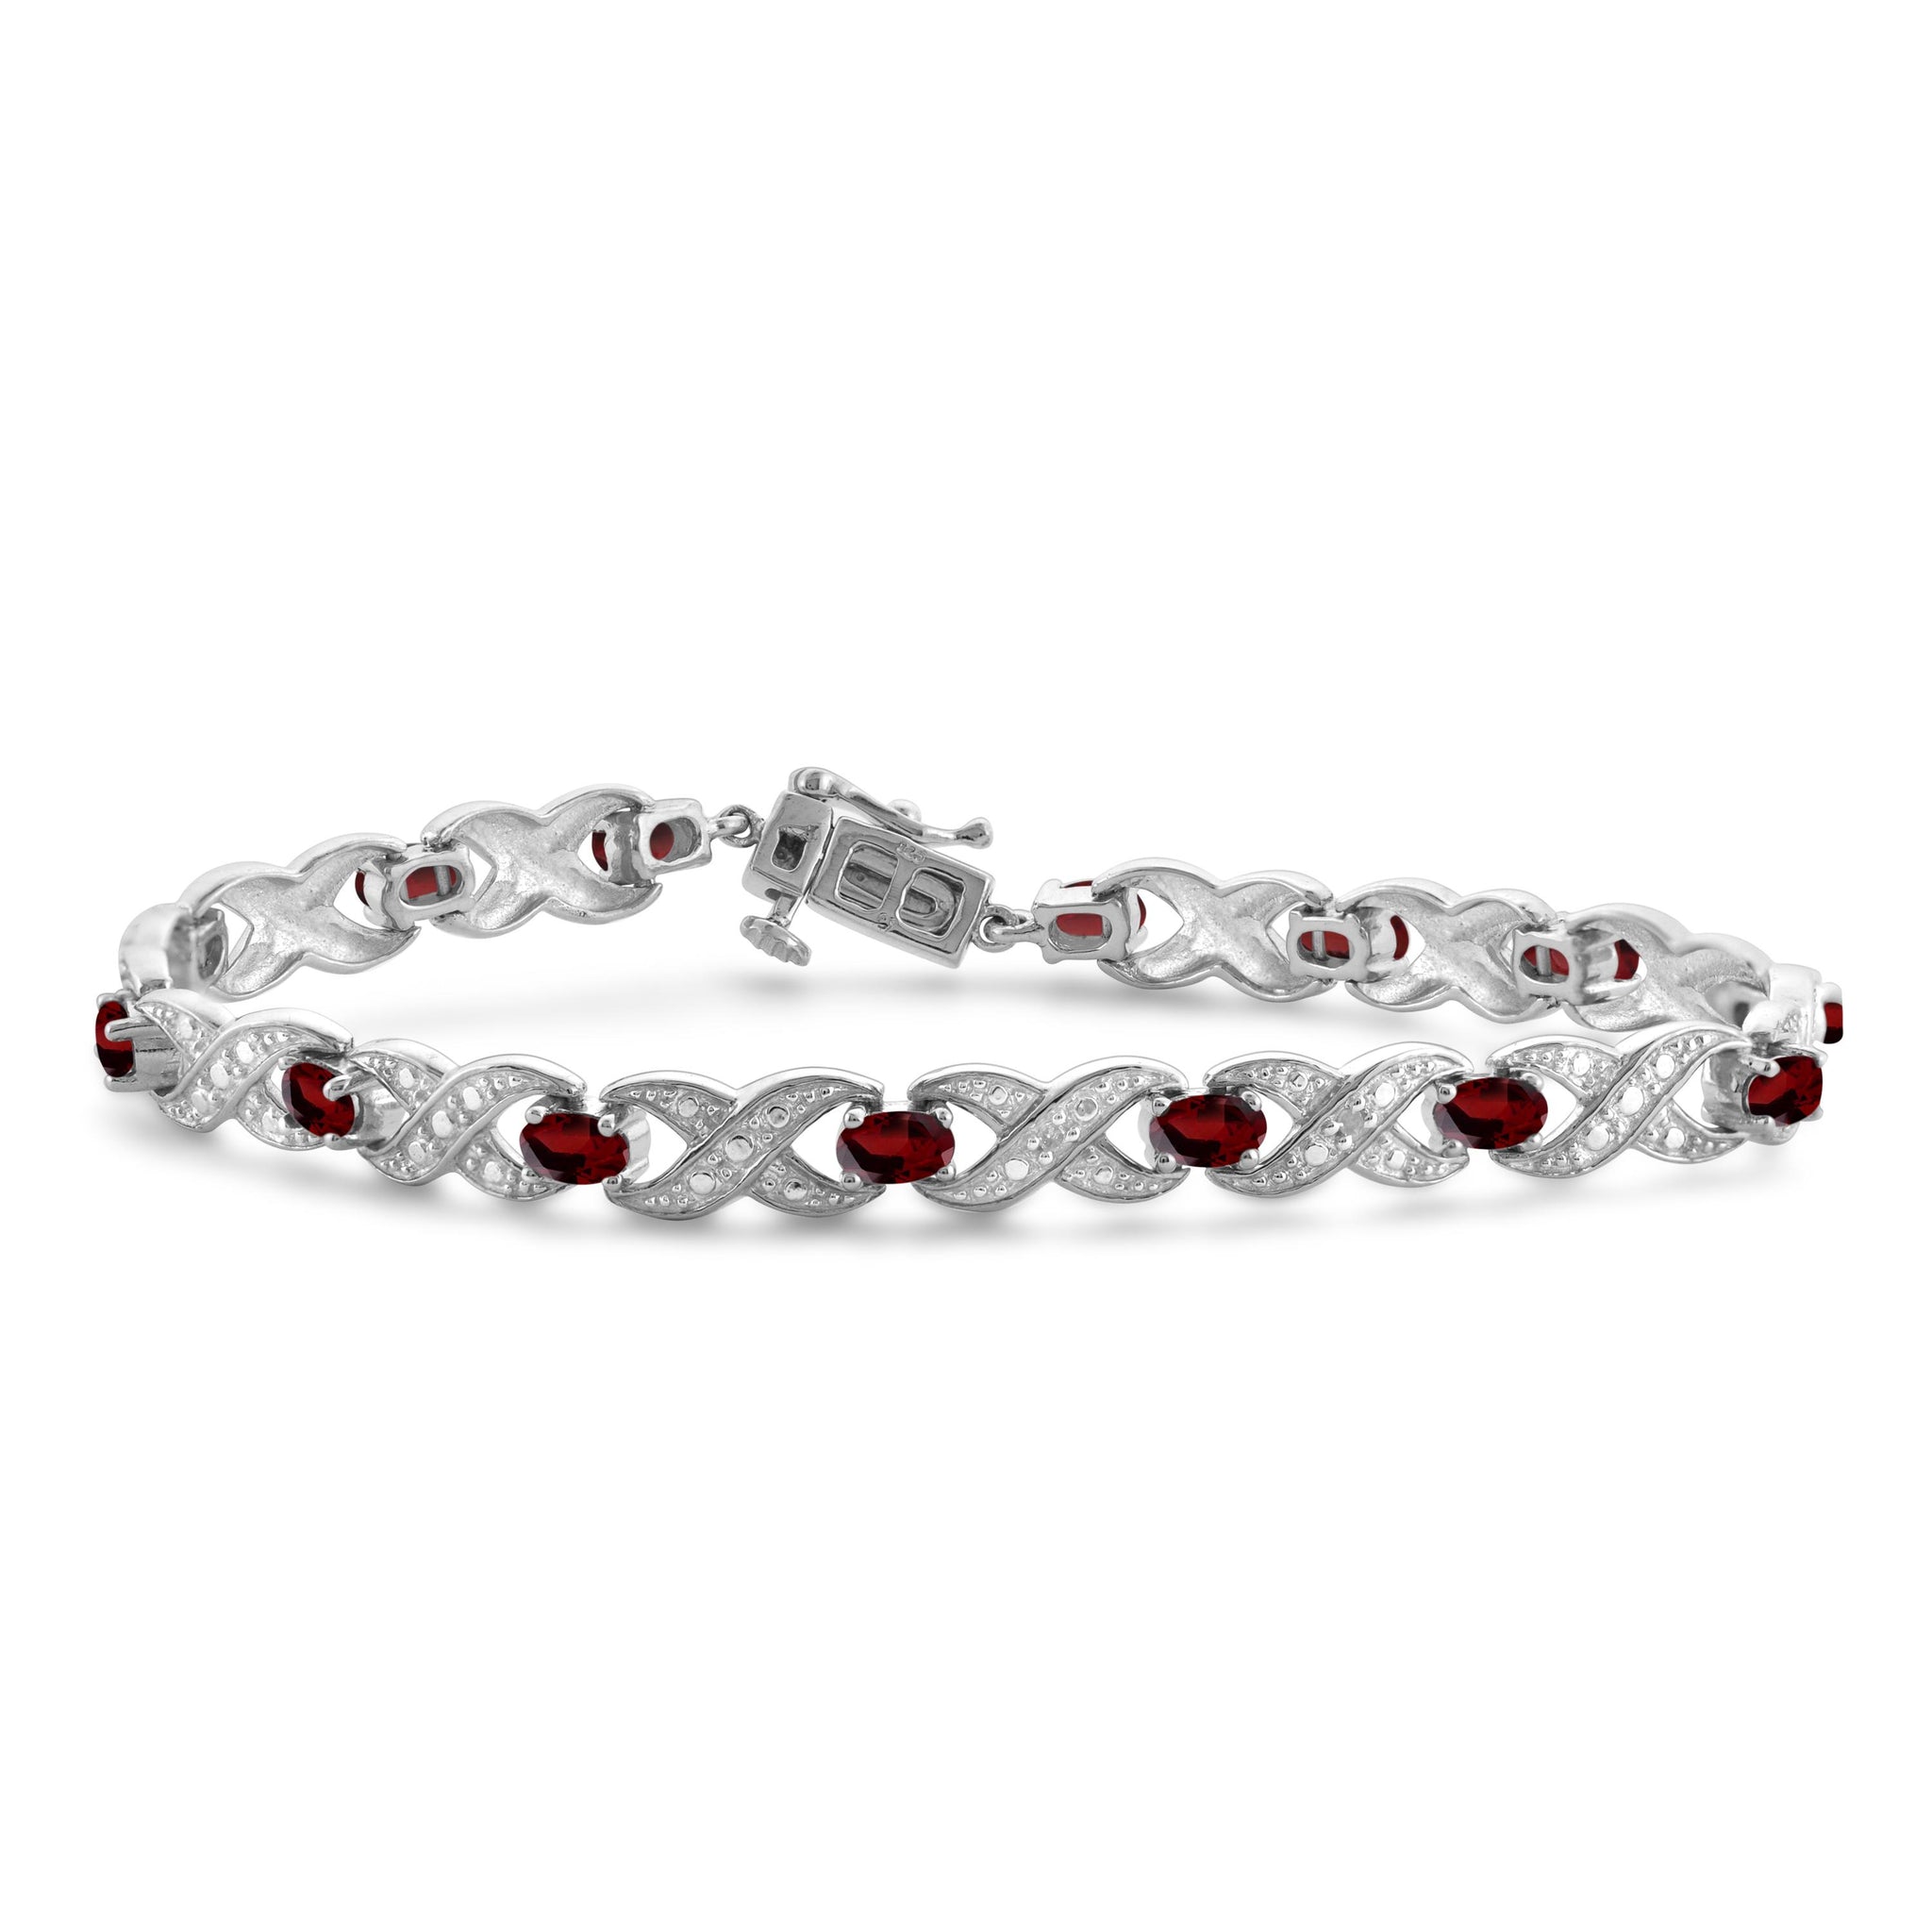 JewelonFire 4 1/2 Carat T.G.W. Garnet And White Diamond Accent Sterling Silver Bracelet - Assorted Colors